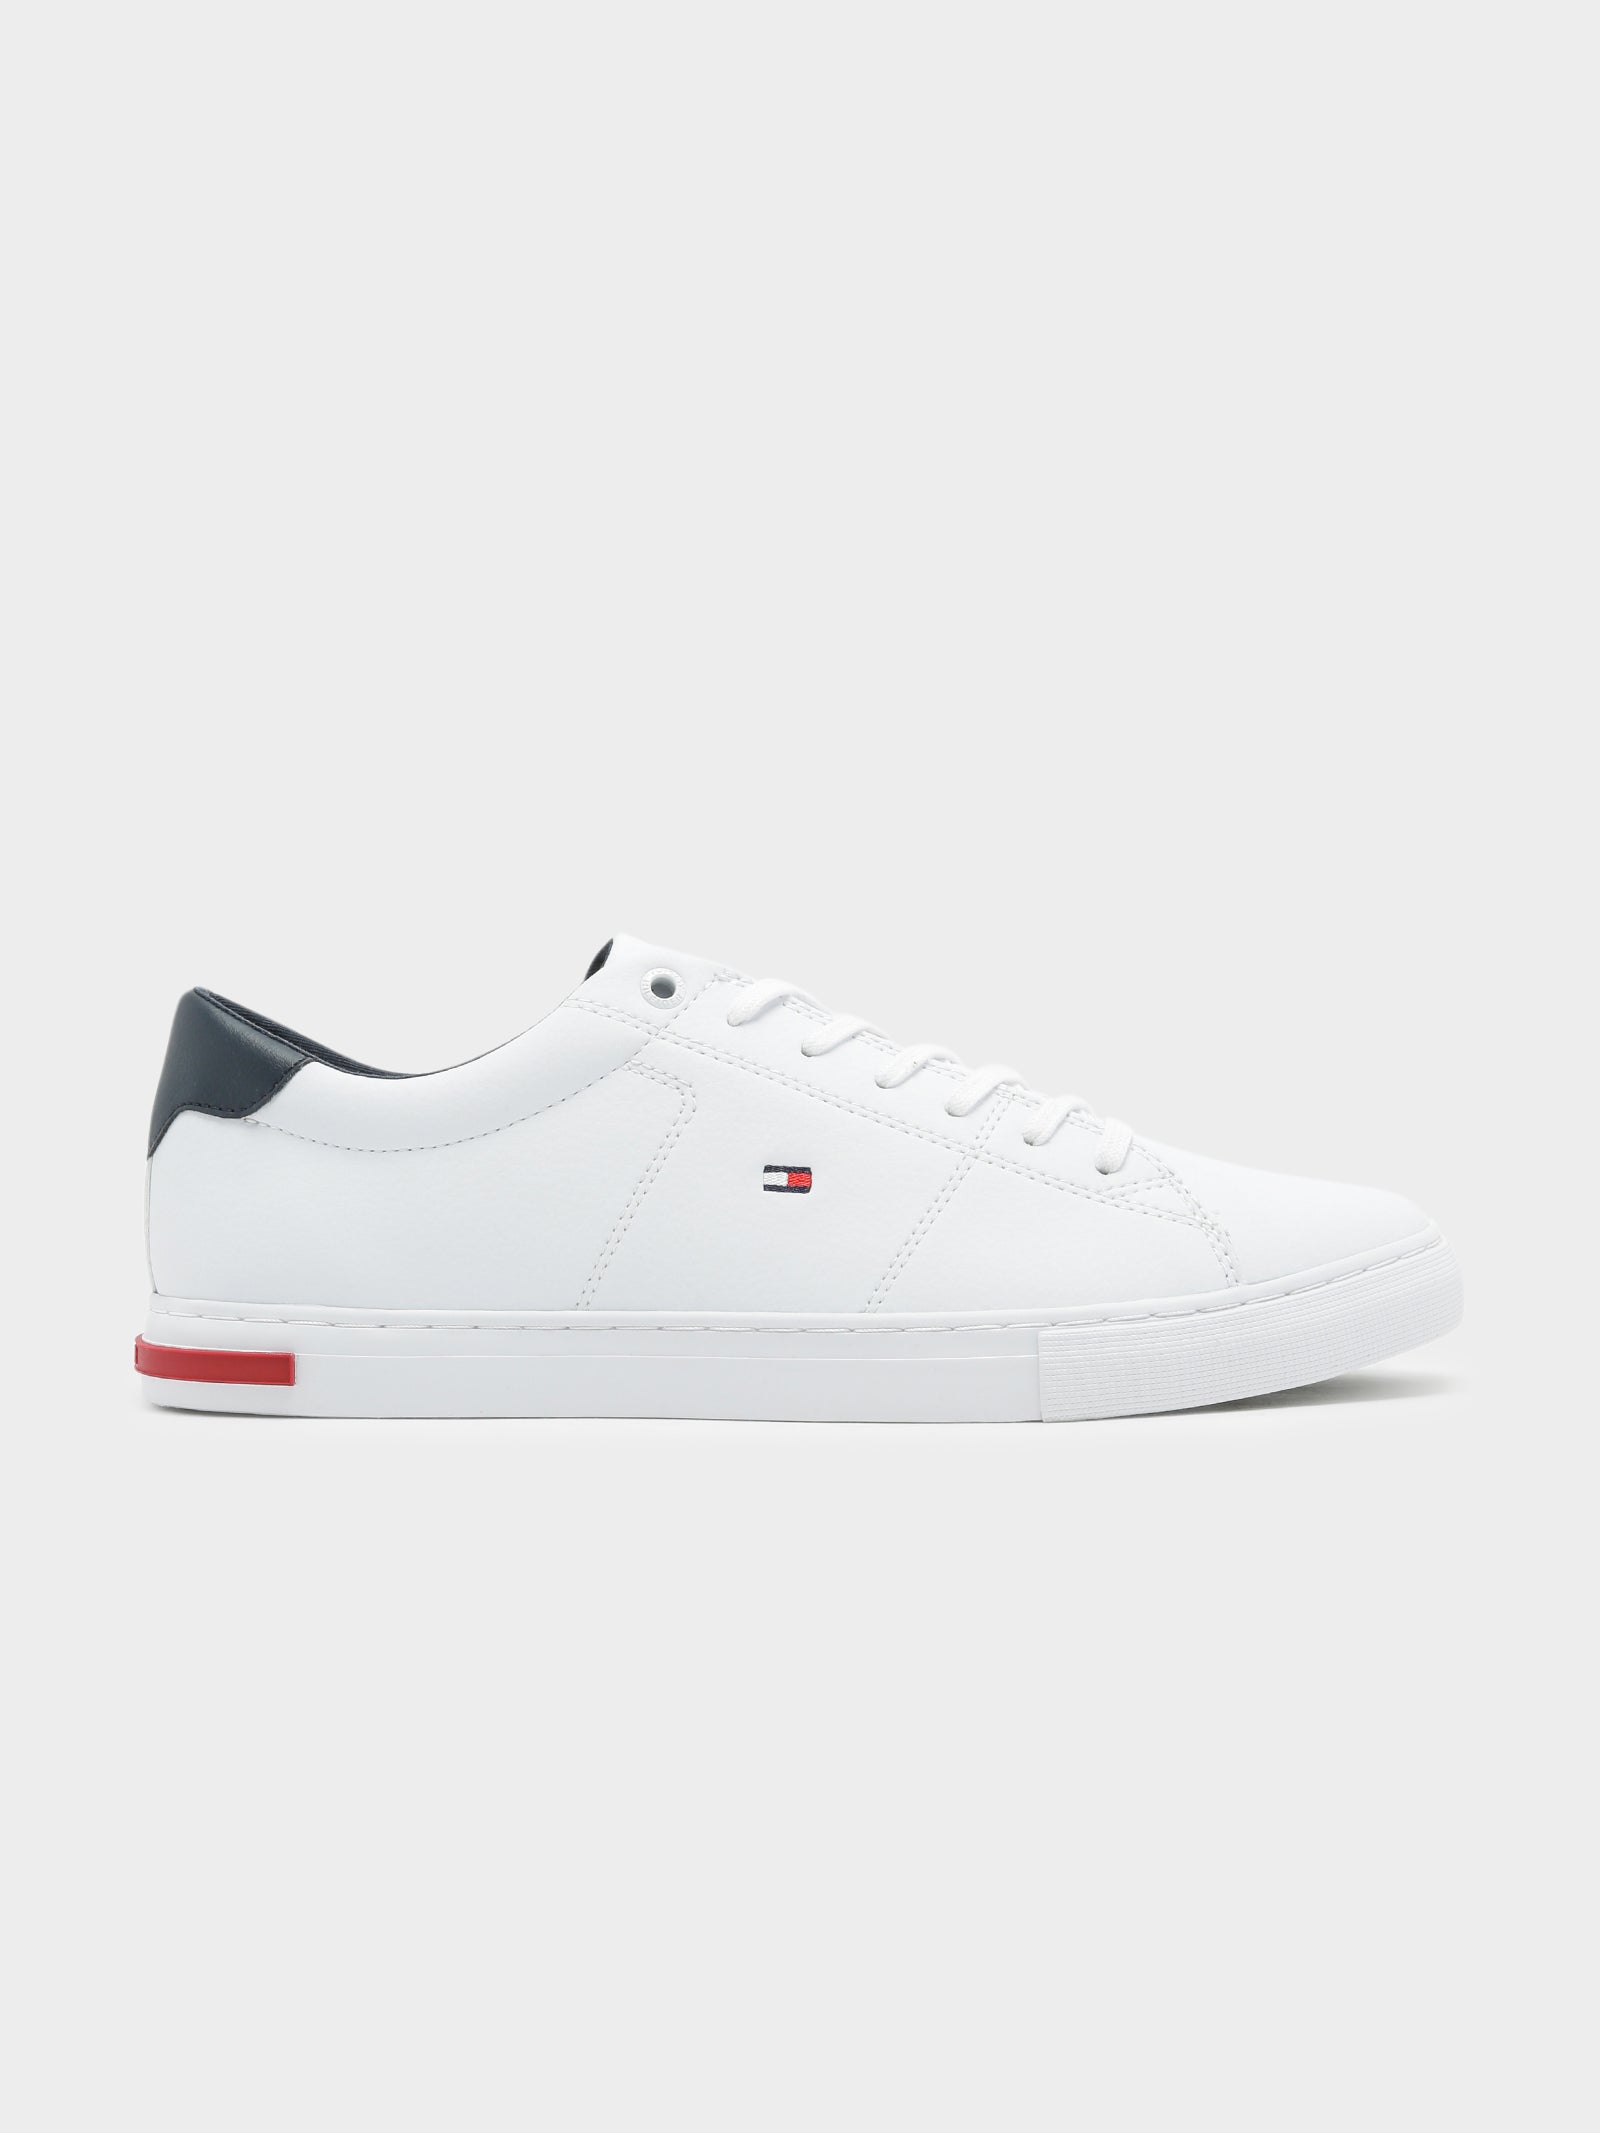 Mens Essential Leather Sneaker in White & Navy